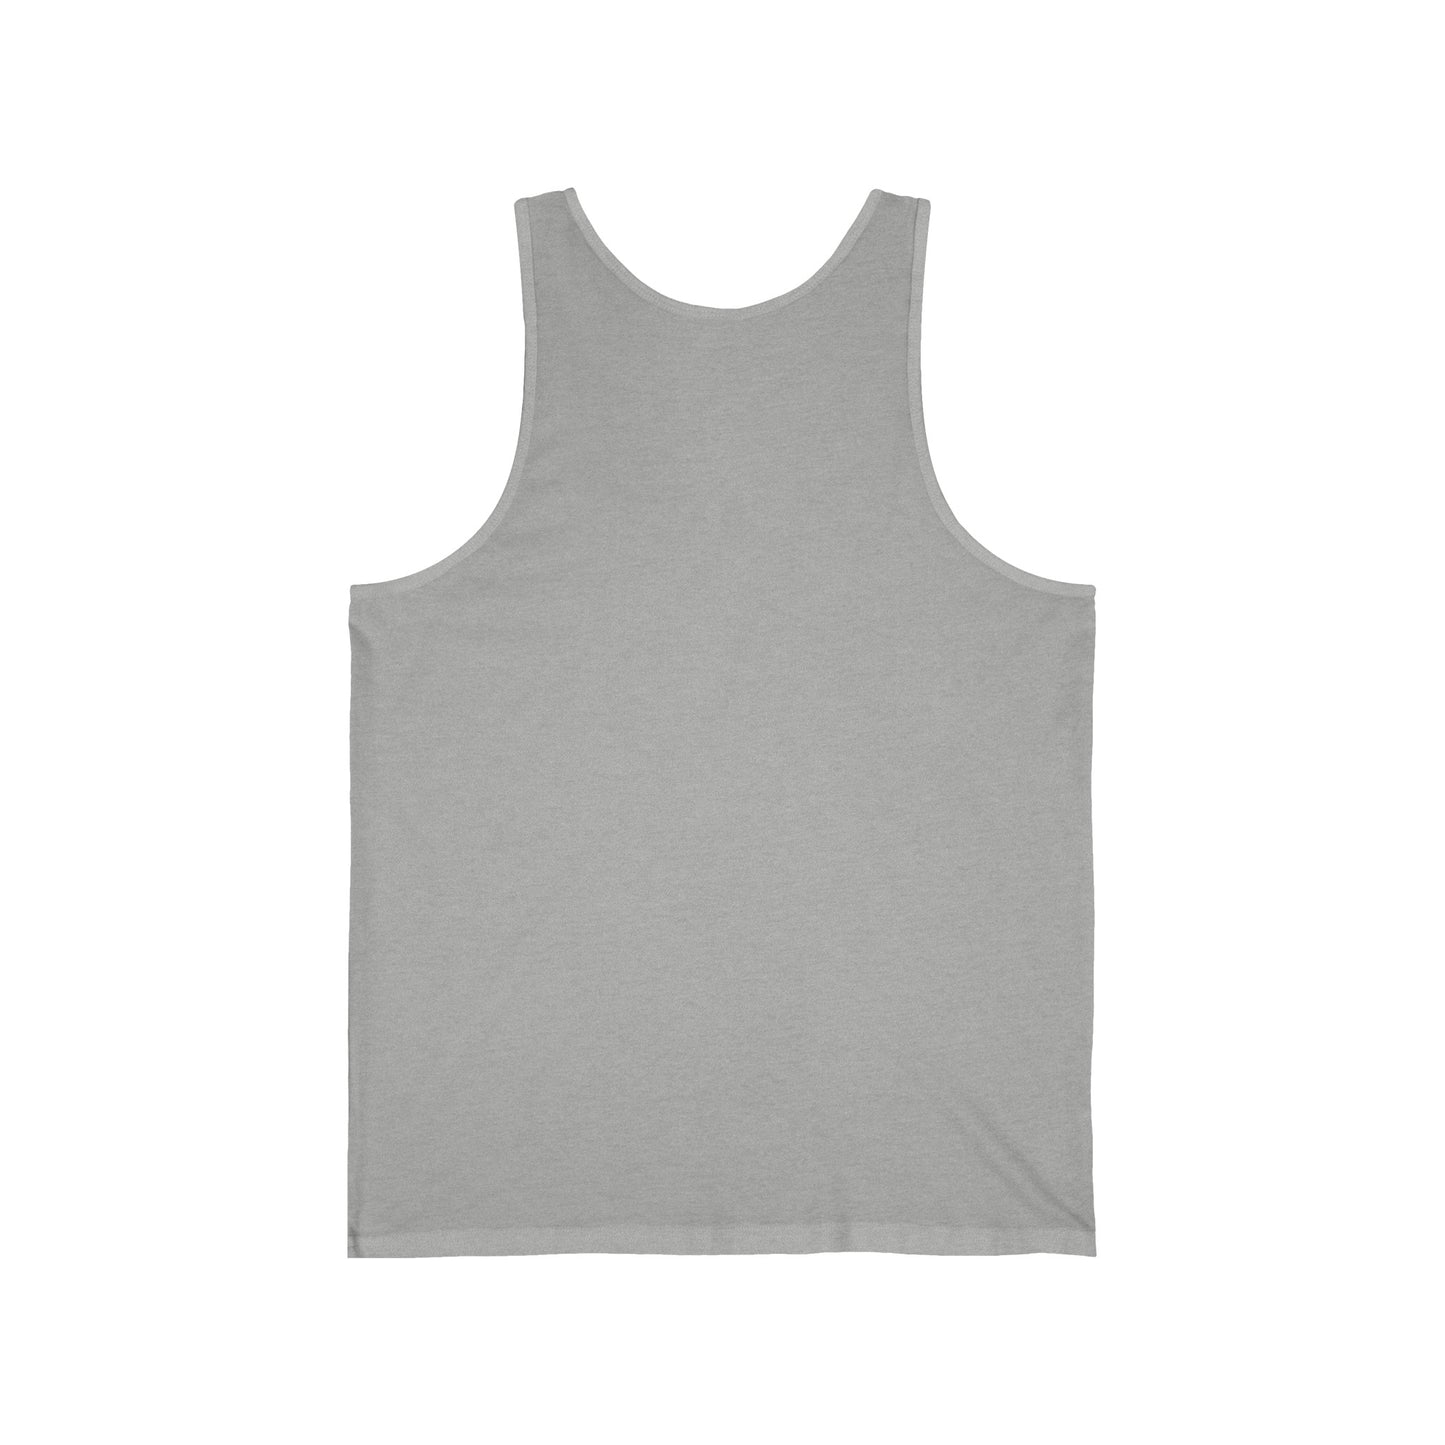 The Best Husbands Can Clean Unisex Jersey Tank